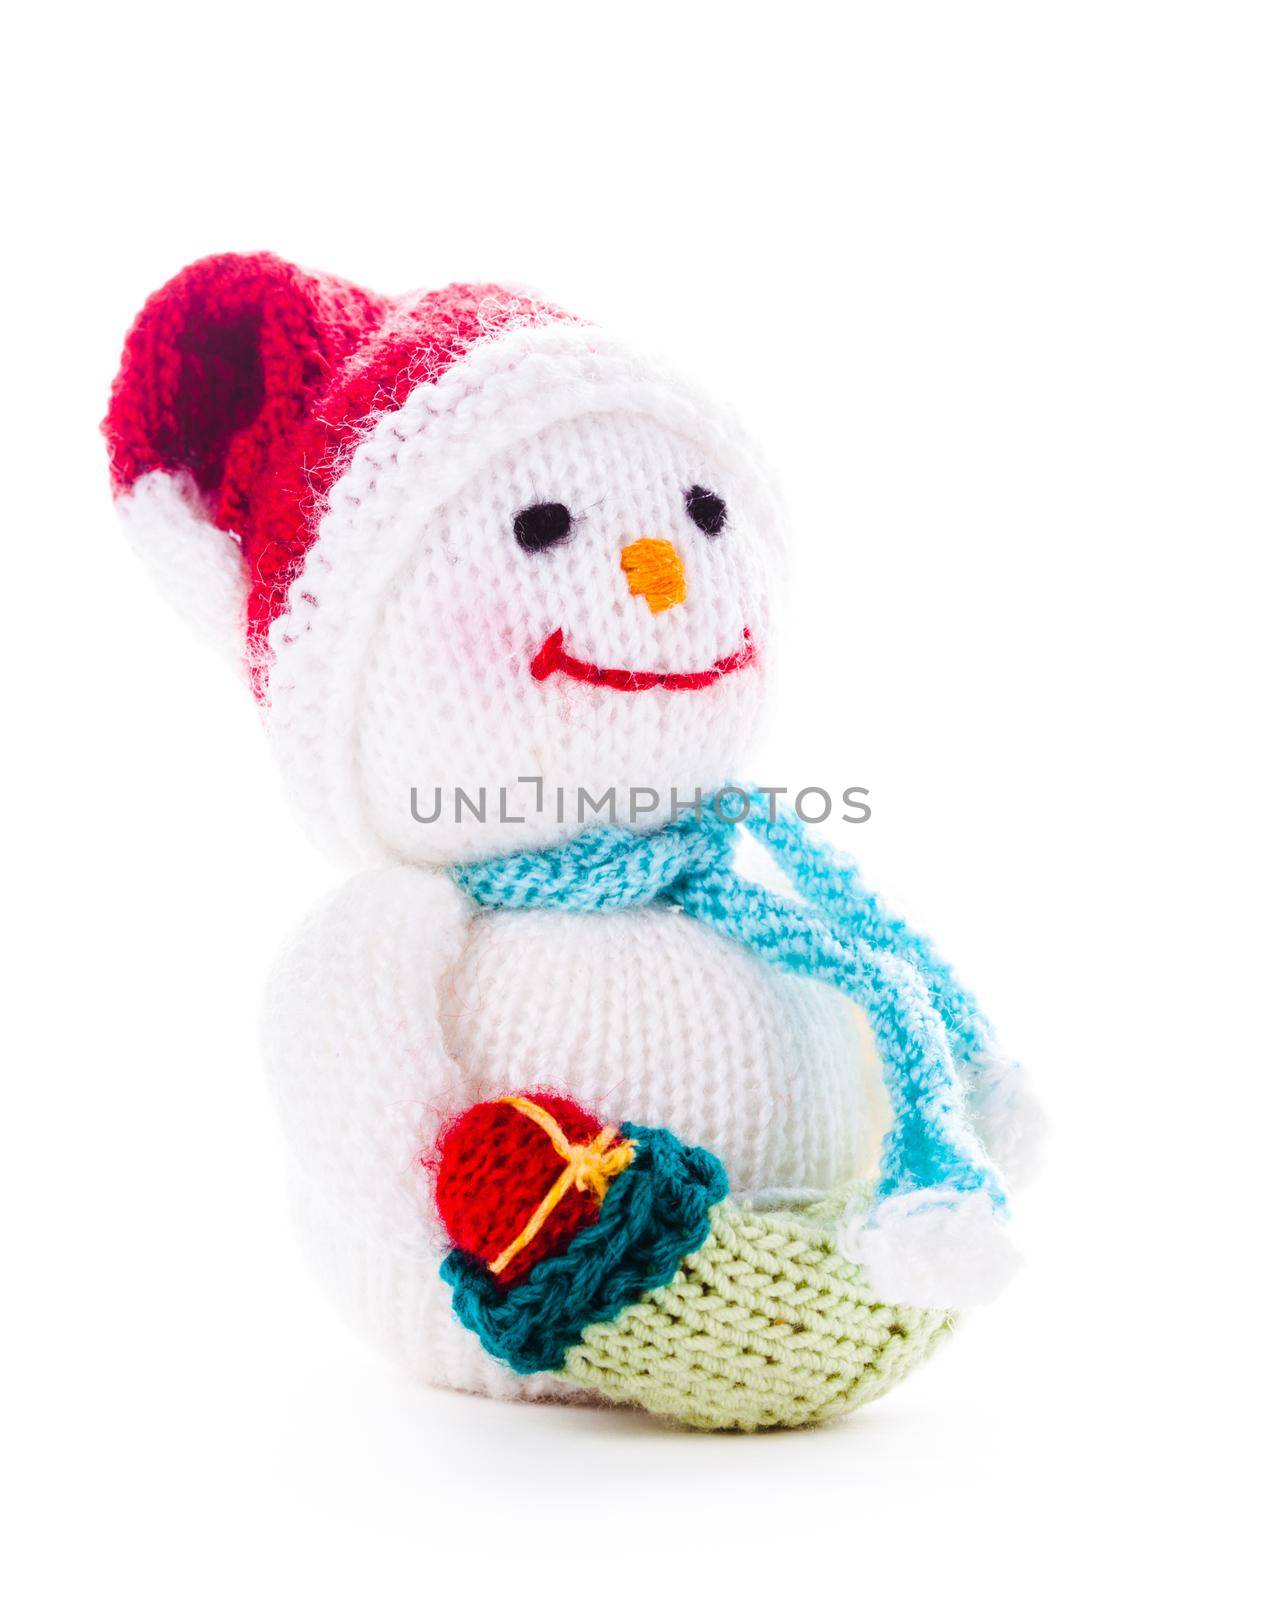 Knitted snowman by oksix